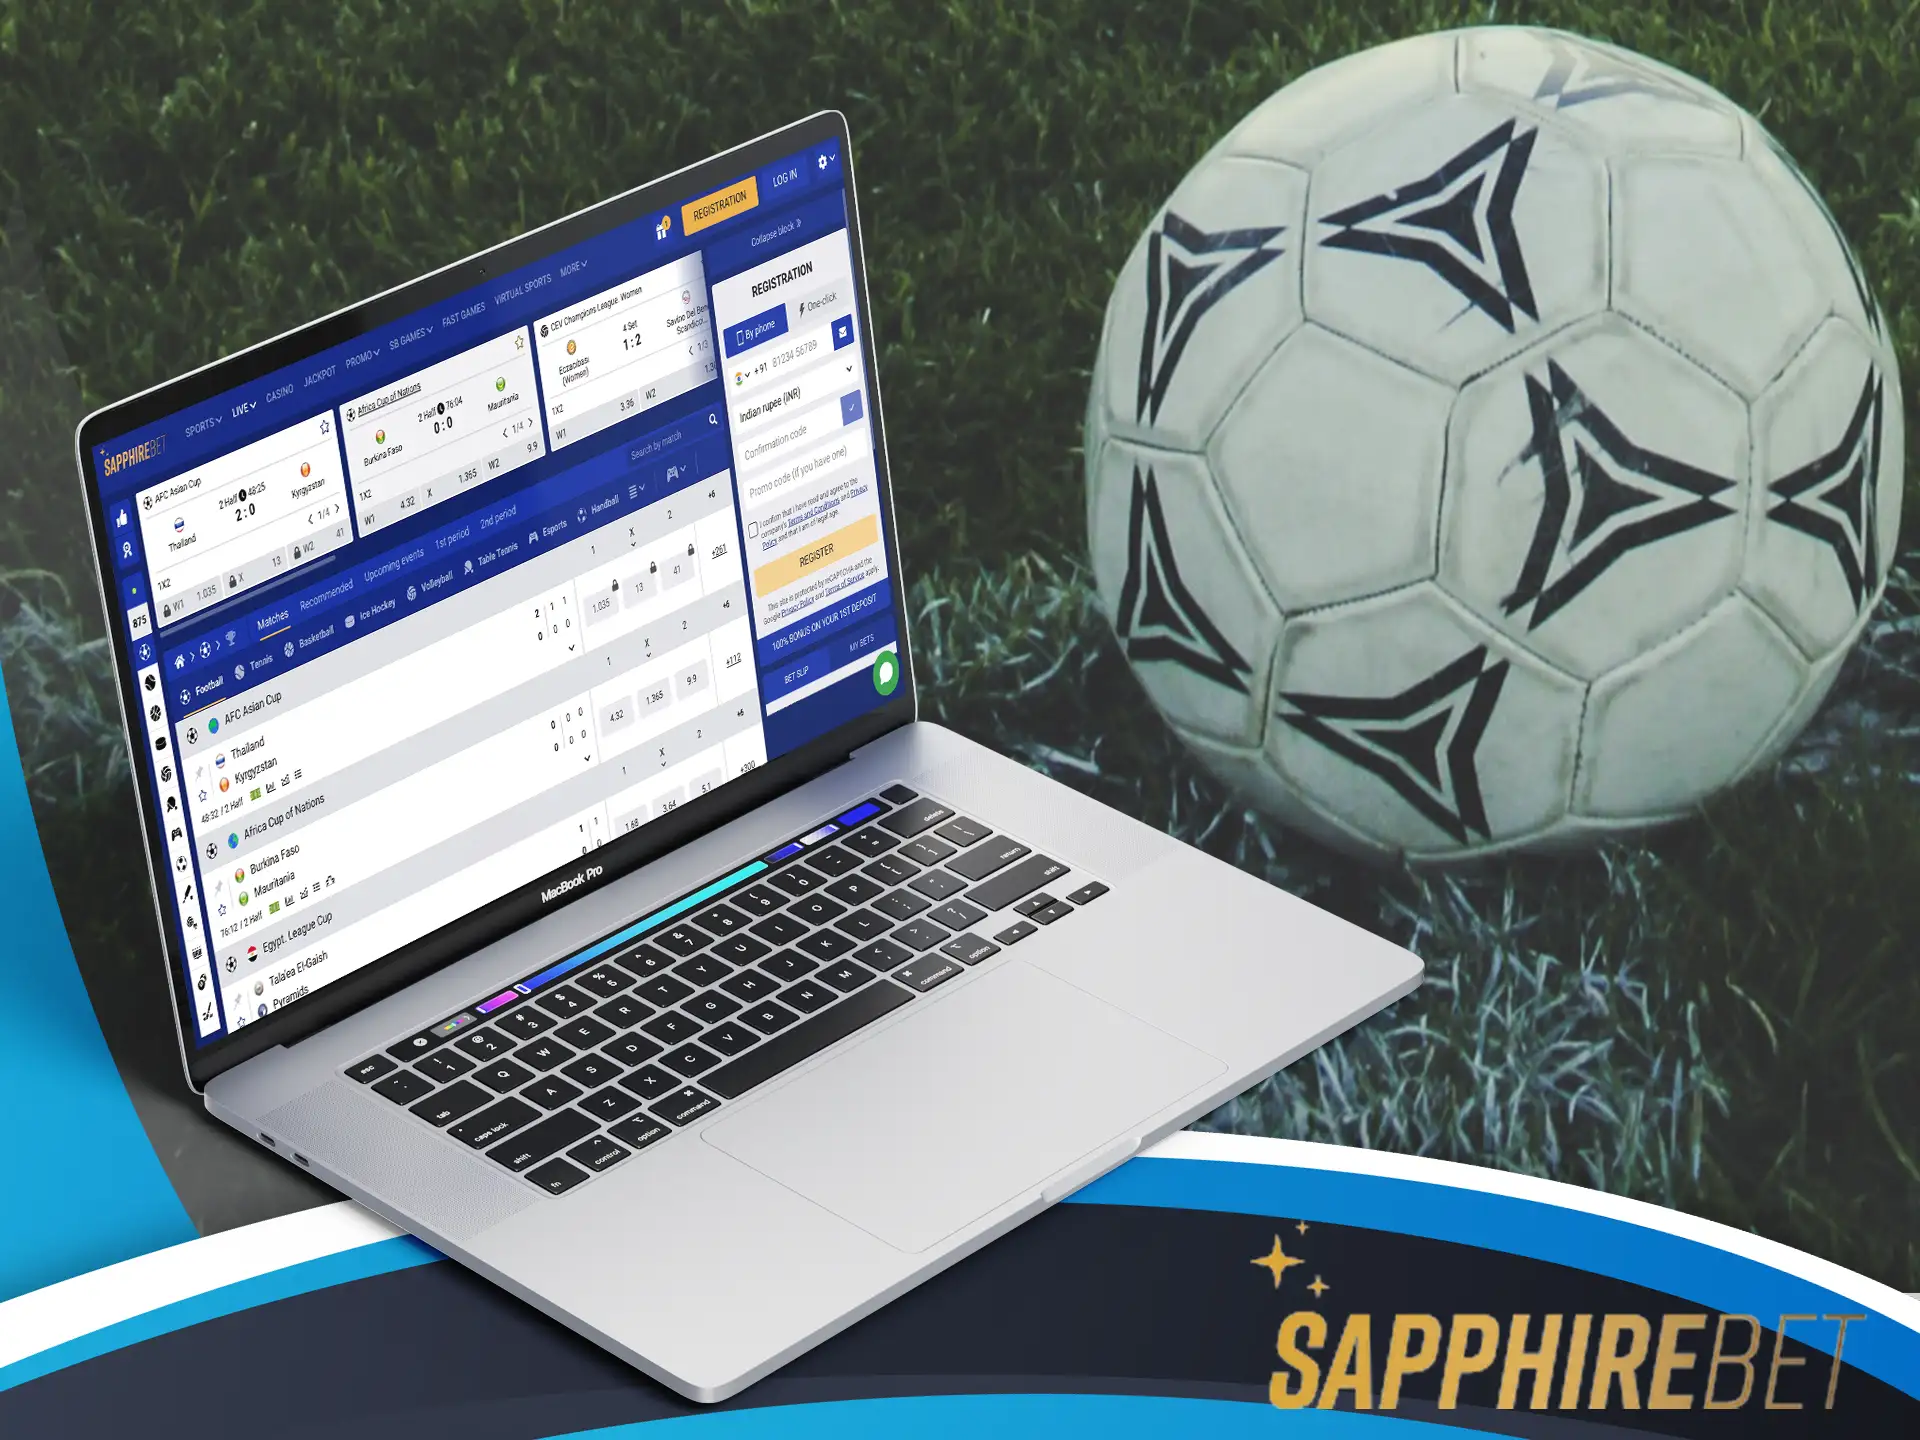 Dive headfirst into betting at the generous bookmaker SapphireBet.